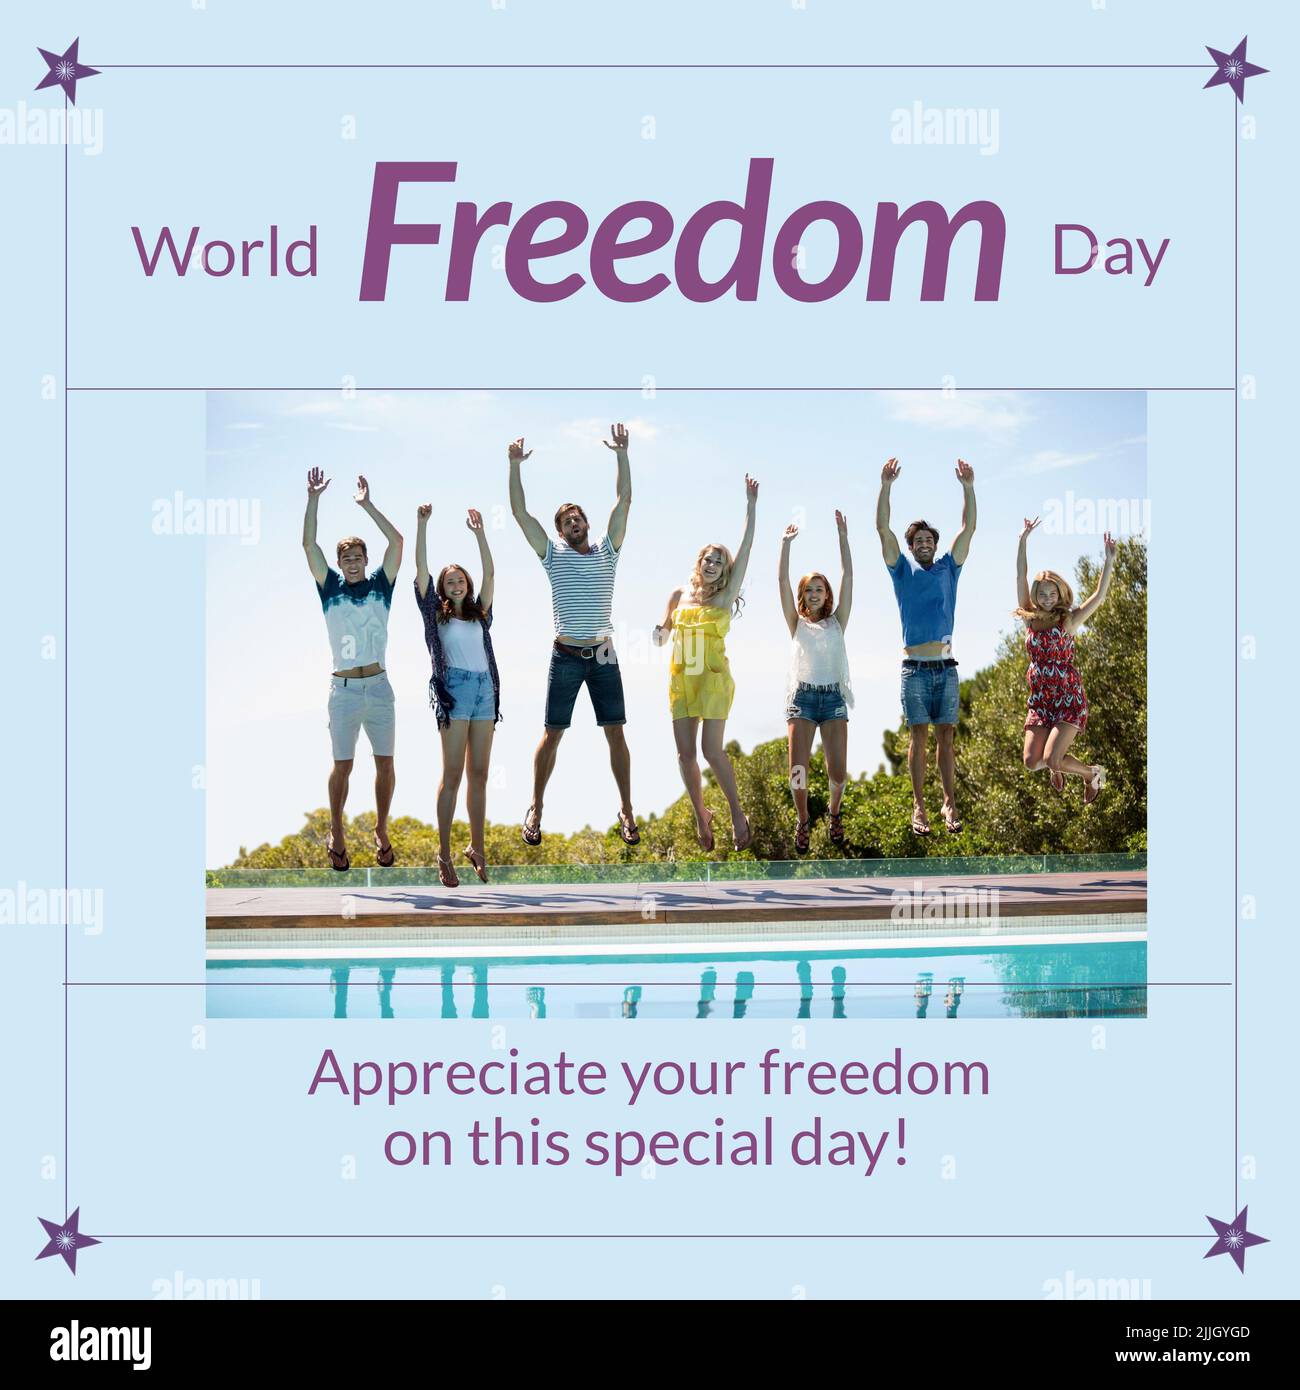 Image of freedom day over happy diverse friends jumping with joy at swimming pool Stock Photo